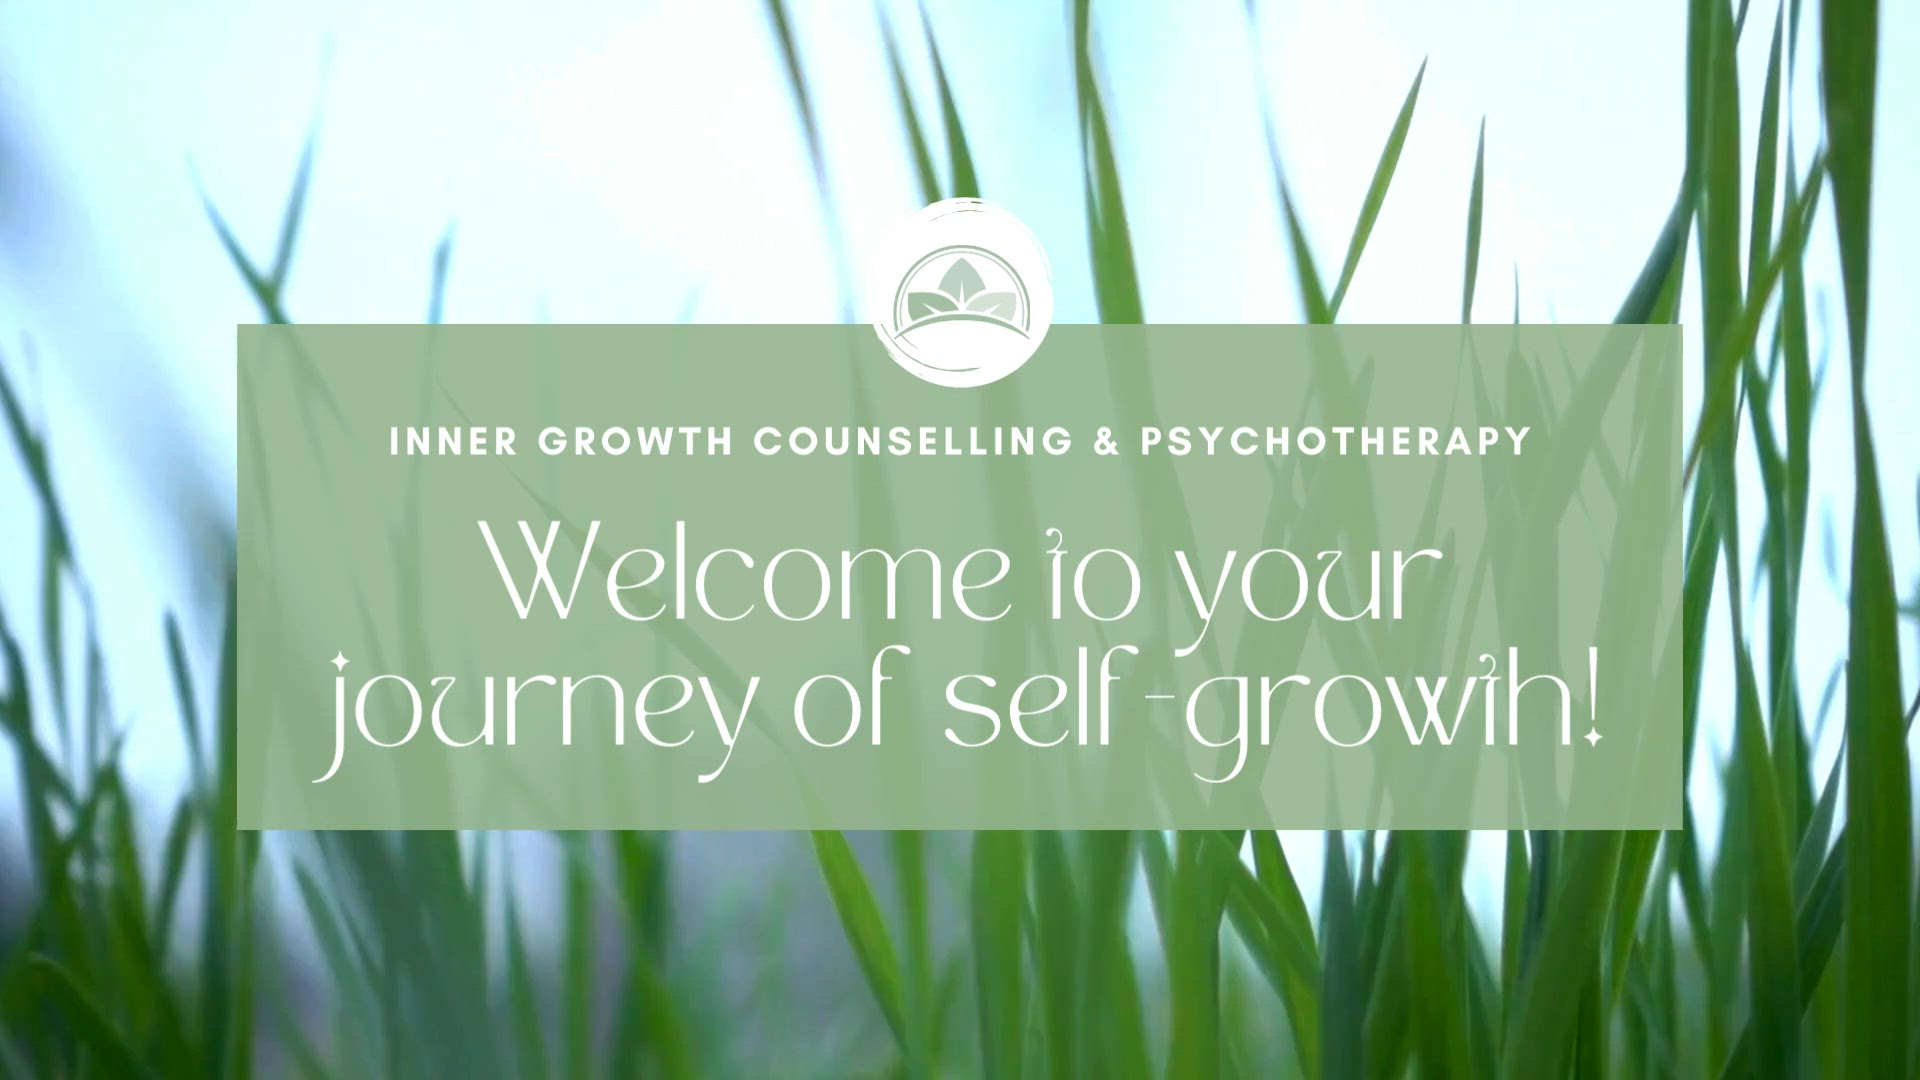 Inner Growth Counselling & Psychotherapy